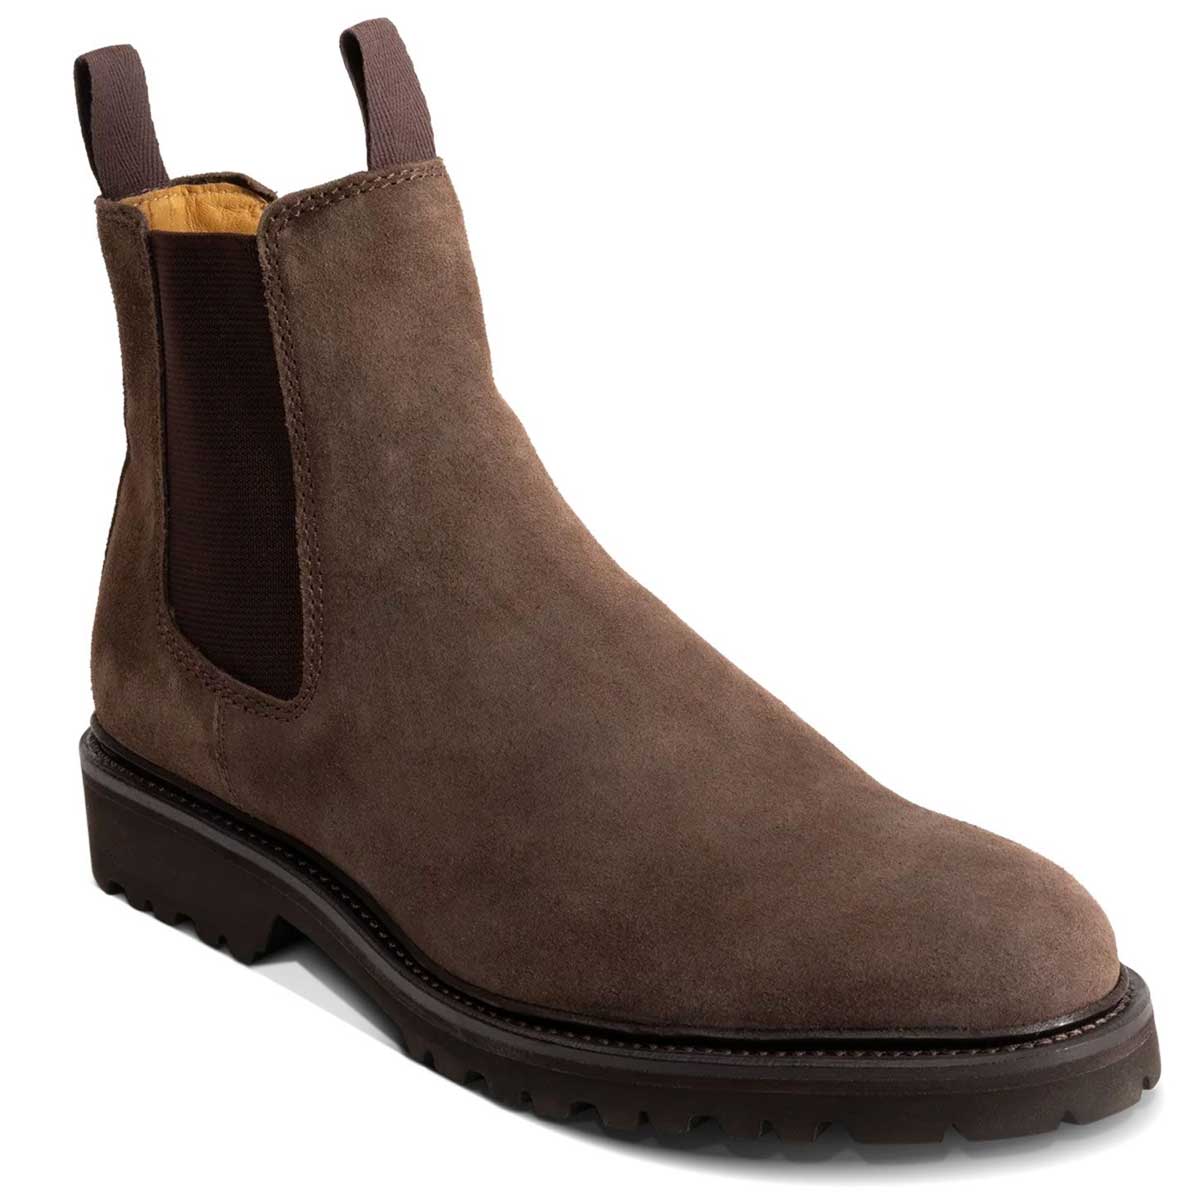 BARKER Camborne Xtra Lite Chelsea Boots - Mens - Brown Waxy Suede